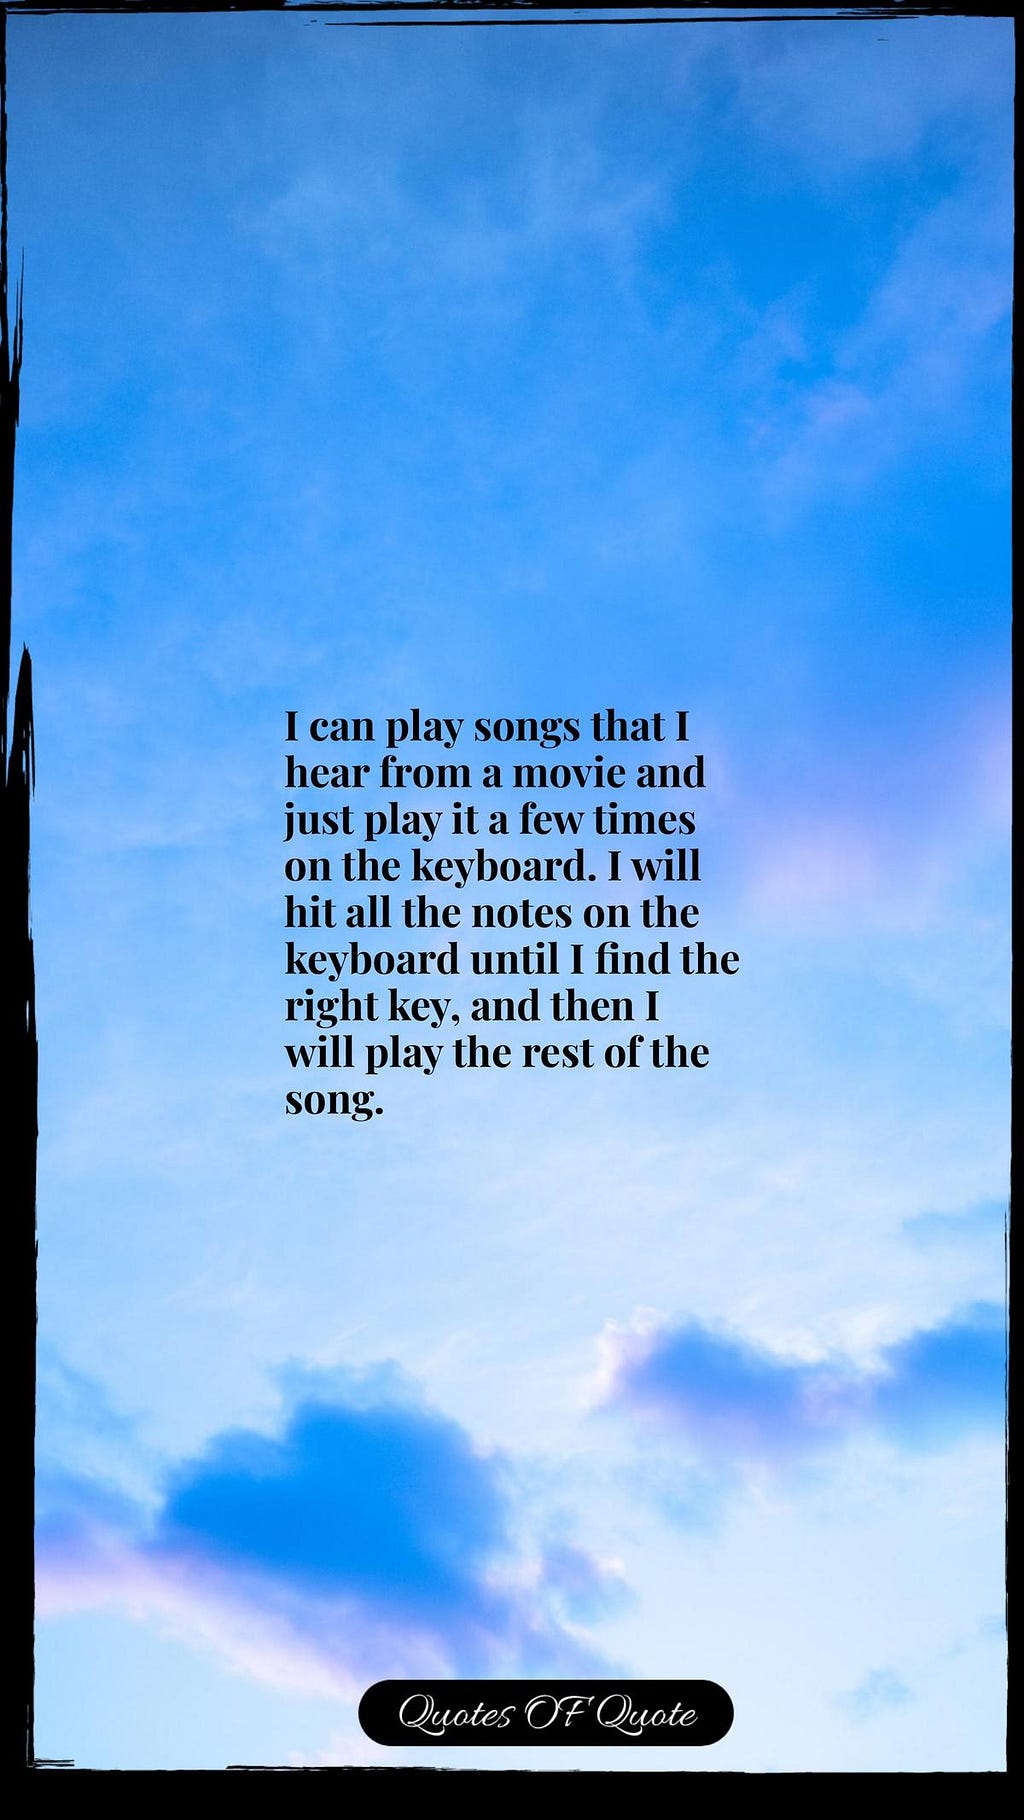 I can play songs that I hear from a movie and just play it a few times on the keyboard. I will hit all the notes on the keyboard until I find the right key, and then I will play the rest of the song.